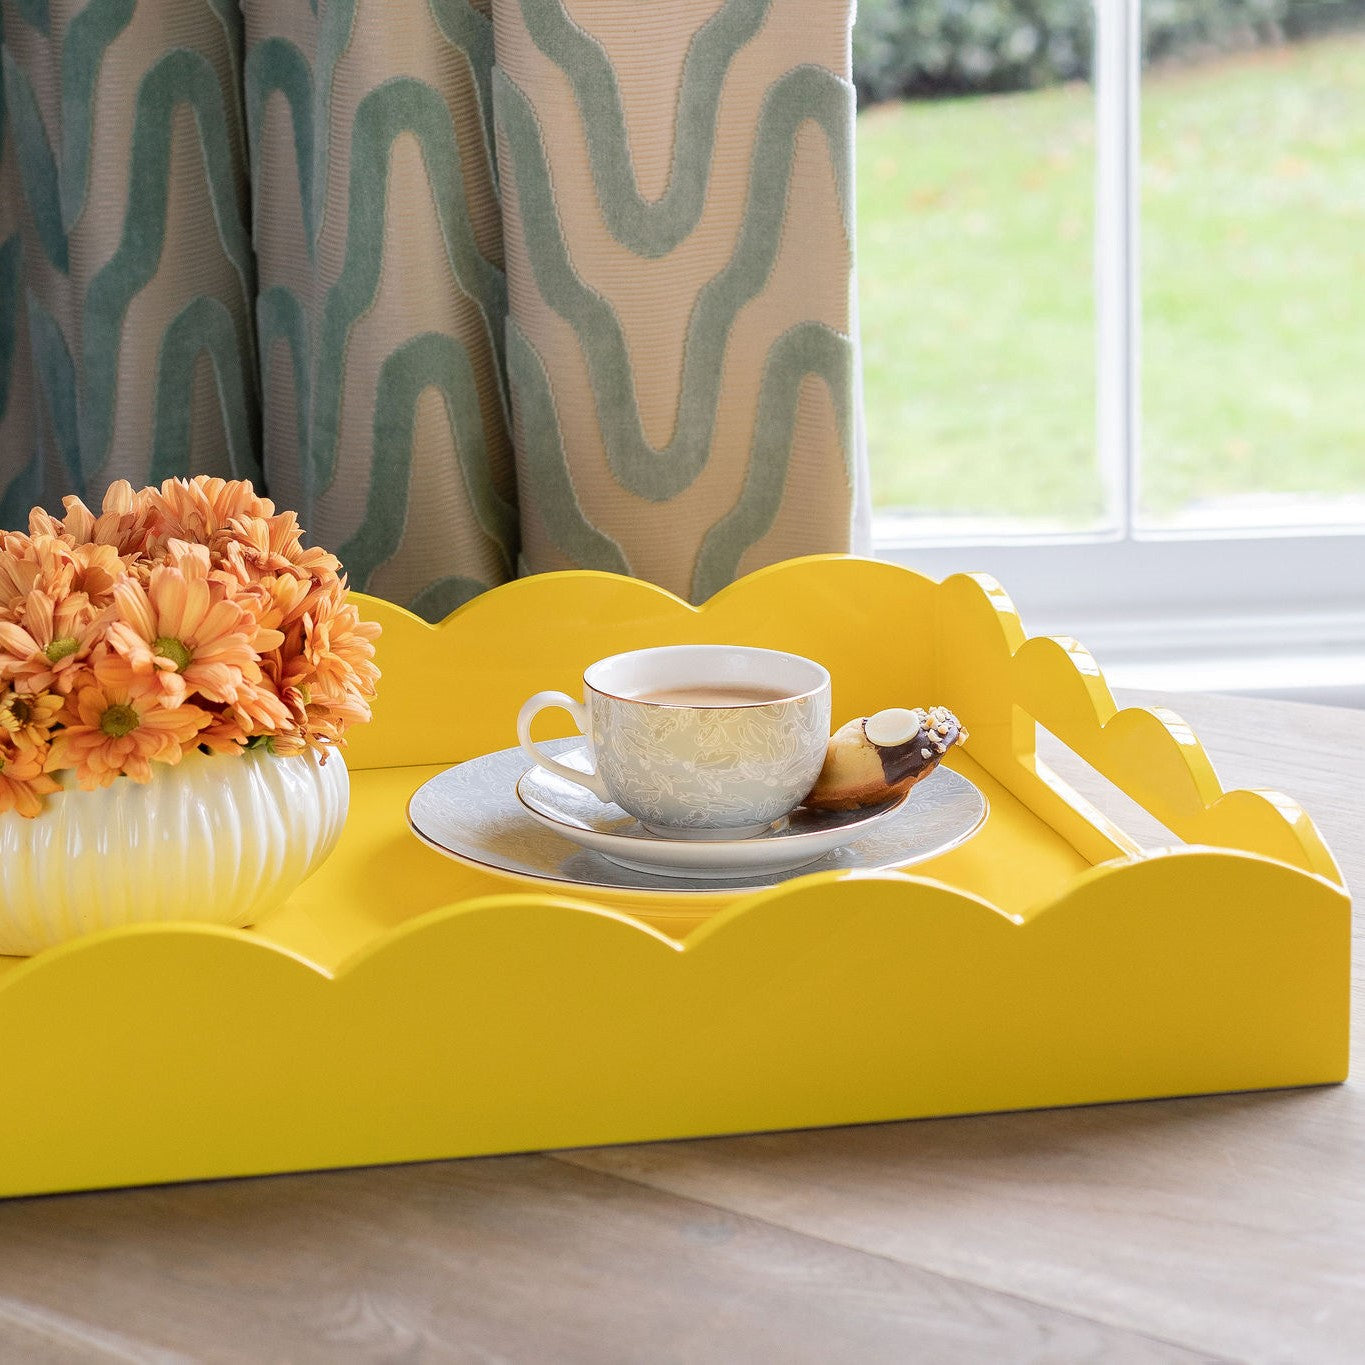 Coffee pots and cups on a yellow lacquer tray with a scalloped edge